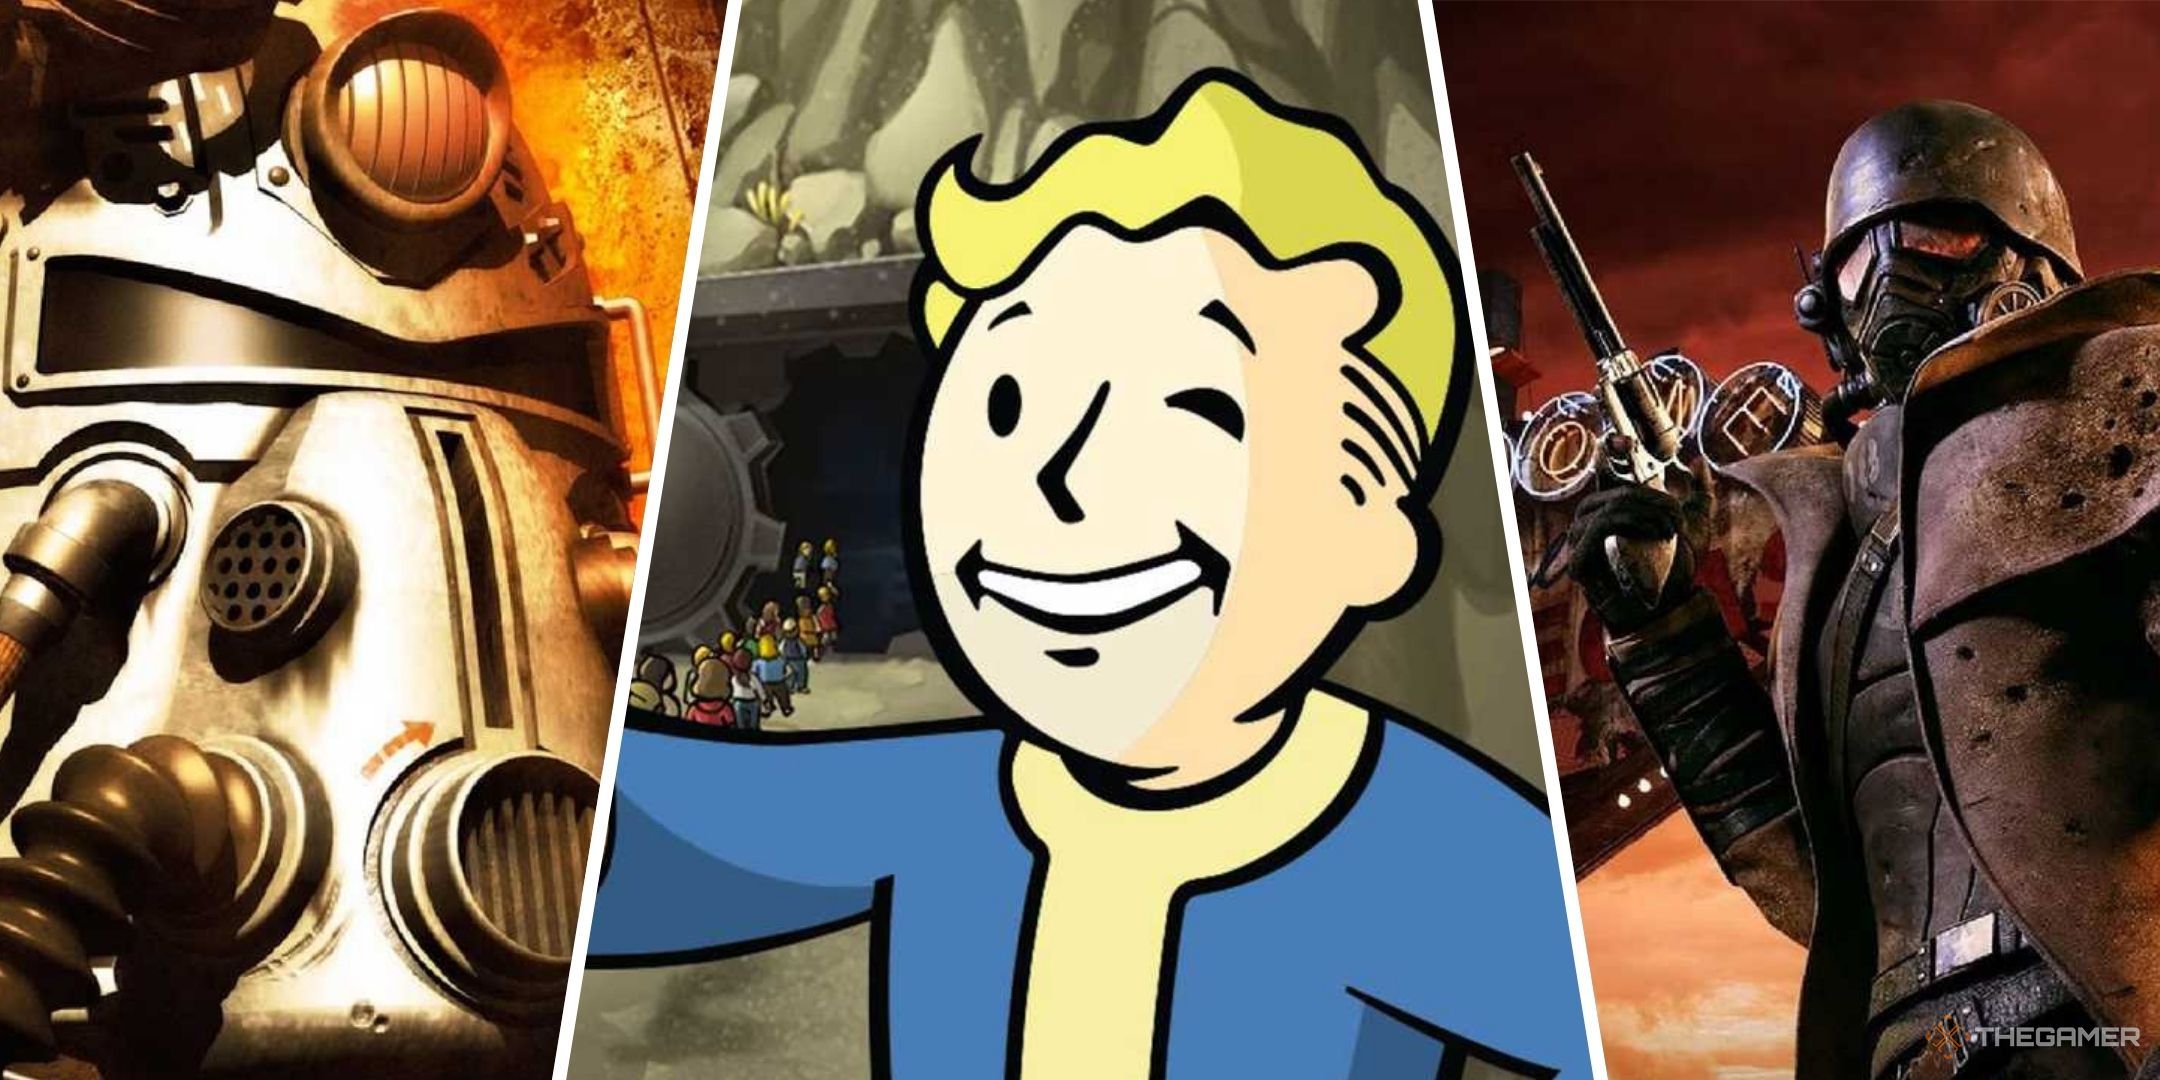 Split images of Brotherhood of Steel Soldier from Fallout, Vault Boy giving a thumbs up, and character in Fallout New Vegas